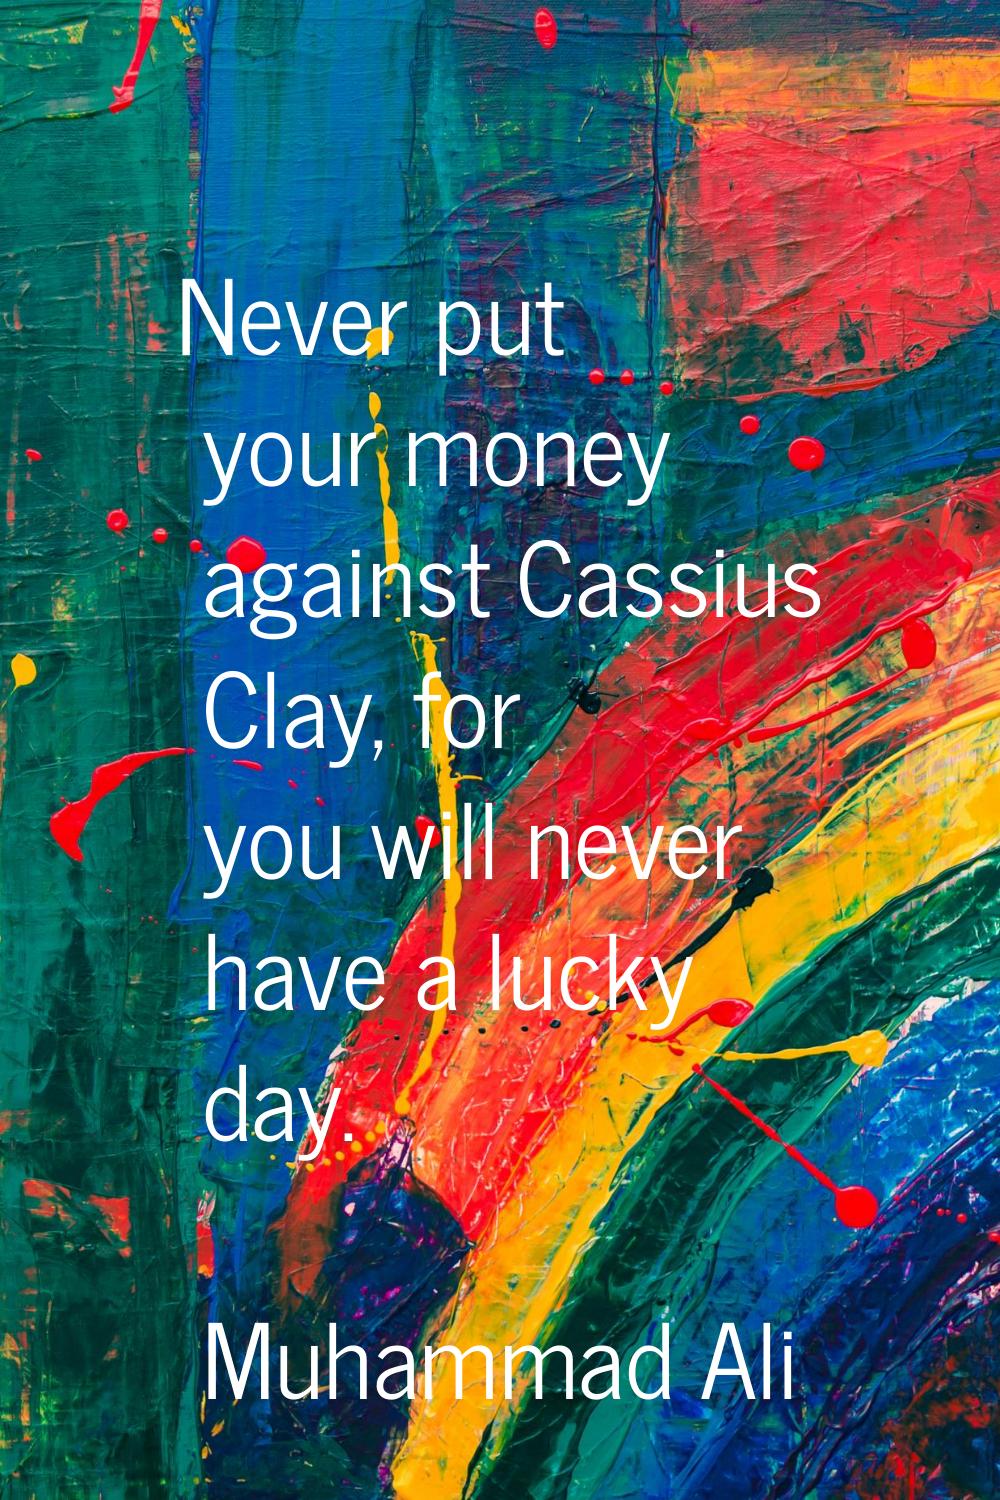 Never put your money against Cassius Clay, for you will never have a lucky day.